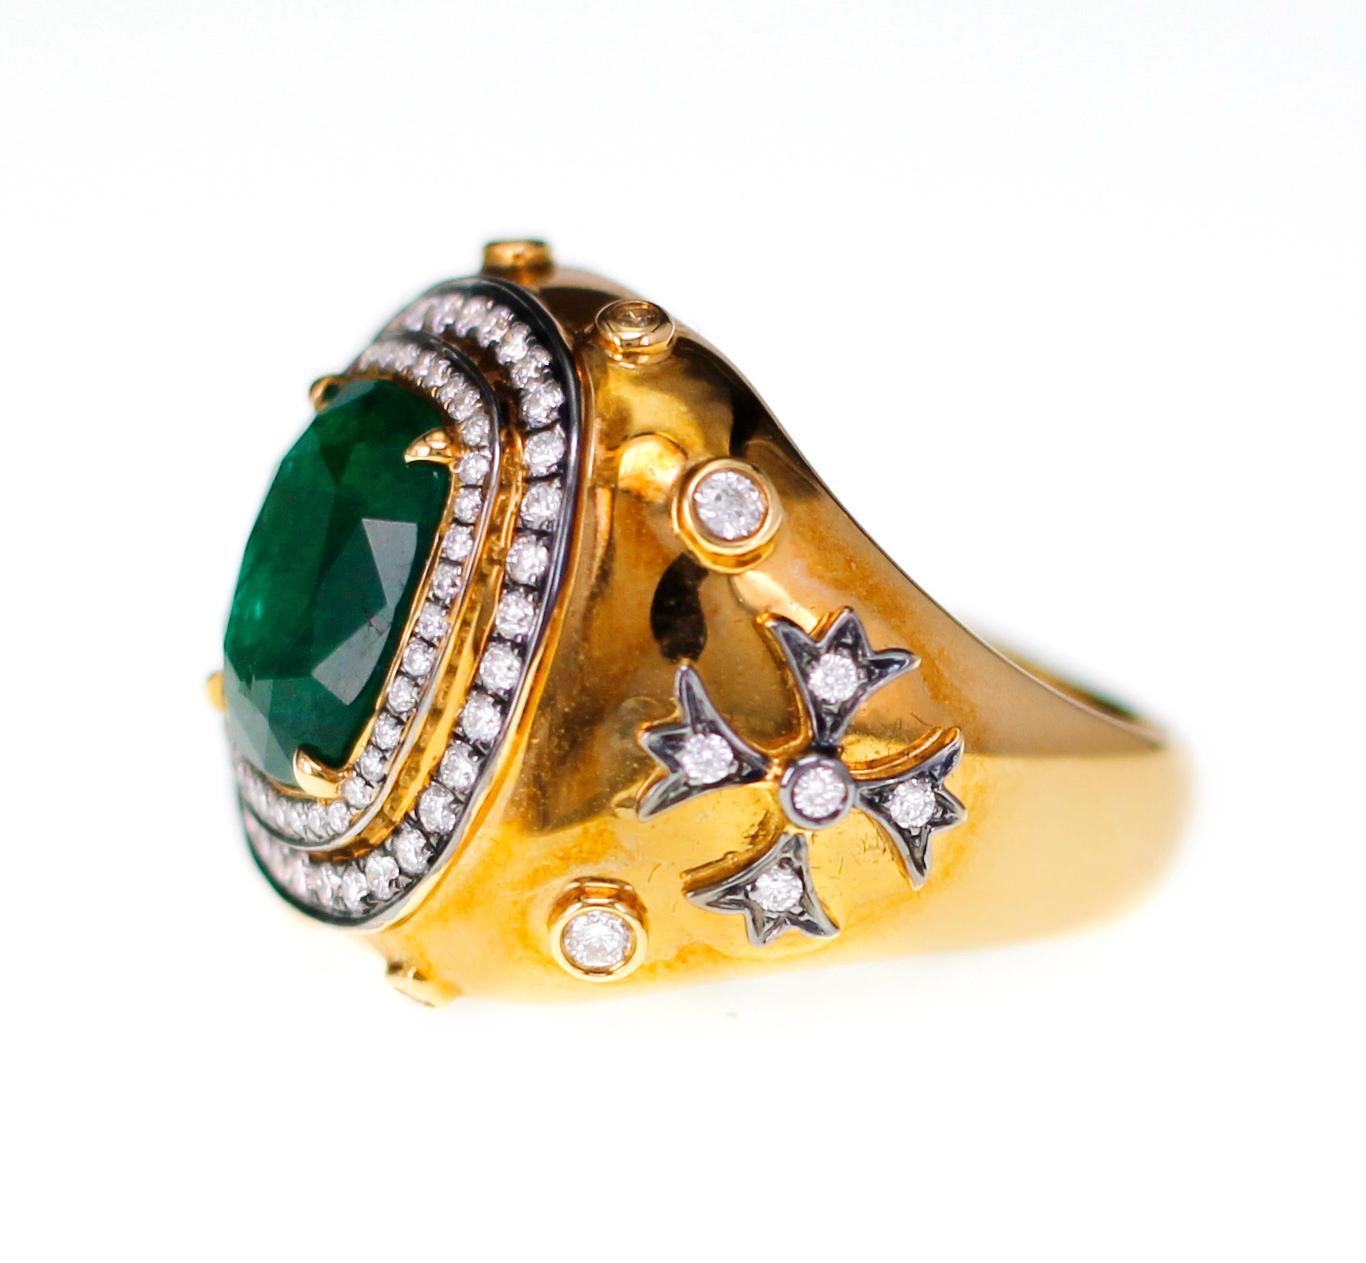 Victorian 3.19 Carat Vivid Green Zambian Emerald in Antique Style Bridal Ring For Sale